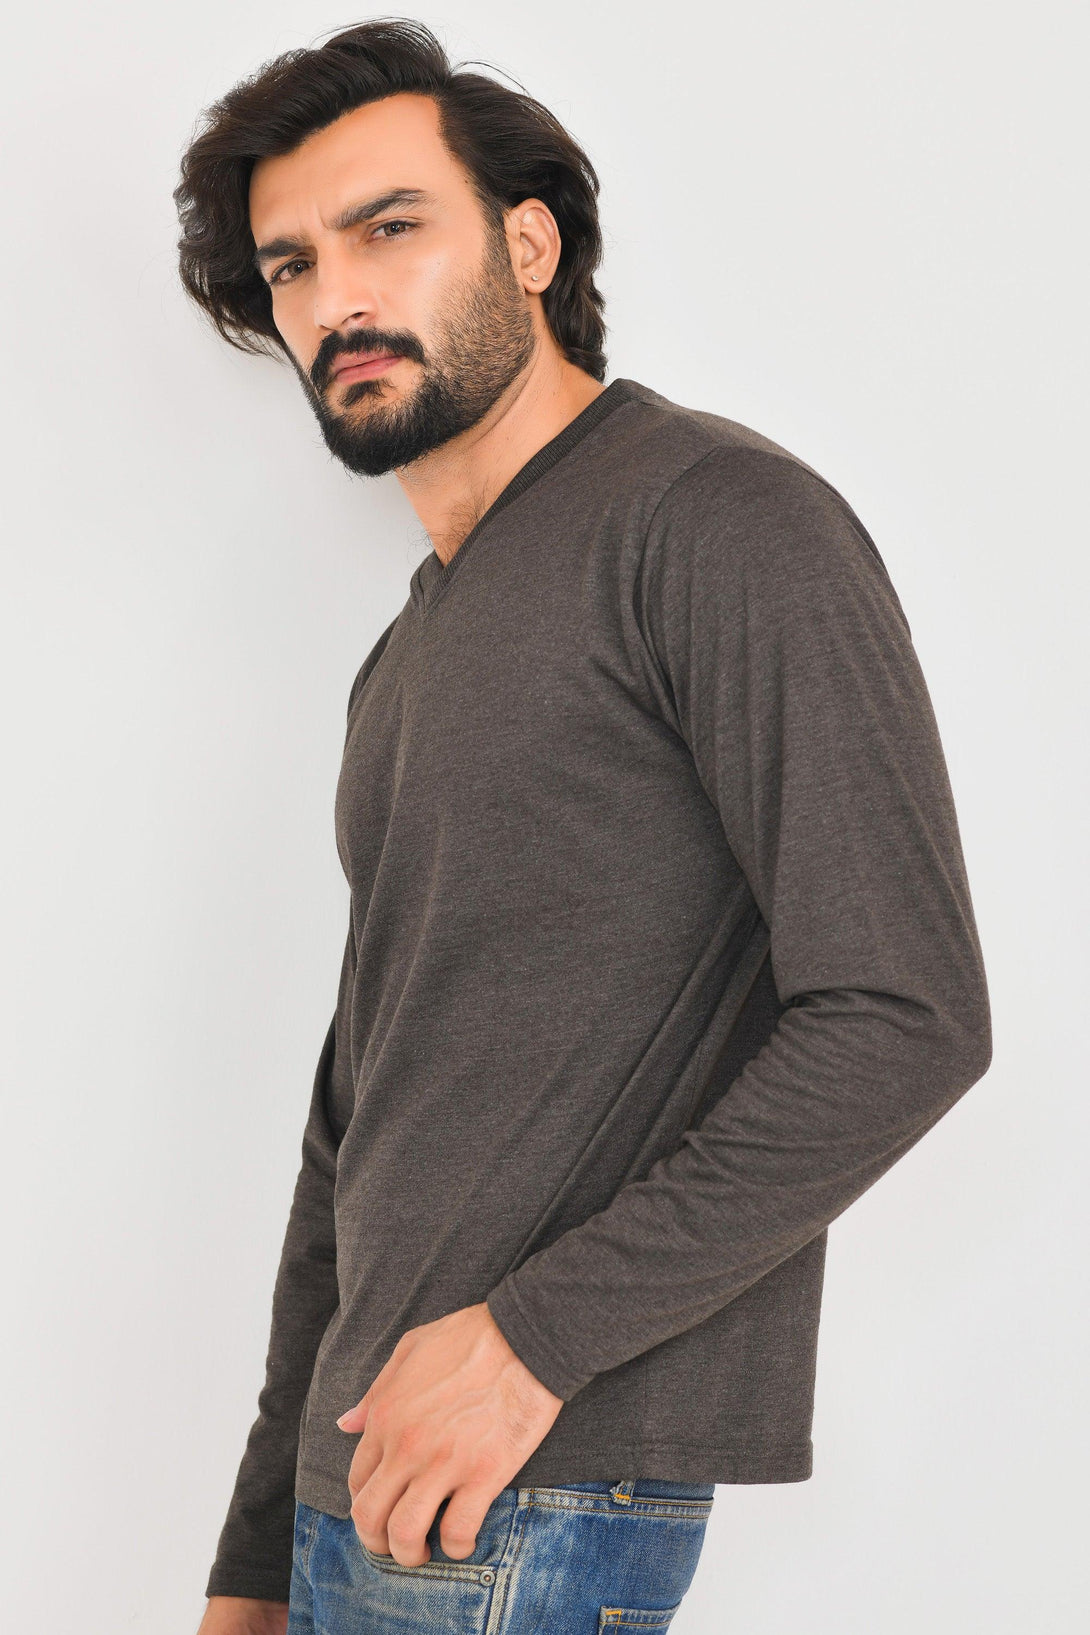 V-Neck Long Sleeve T-Shirts | BLUE - CHARCOAL - GREEN - Pack of 4 - FTS